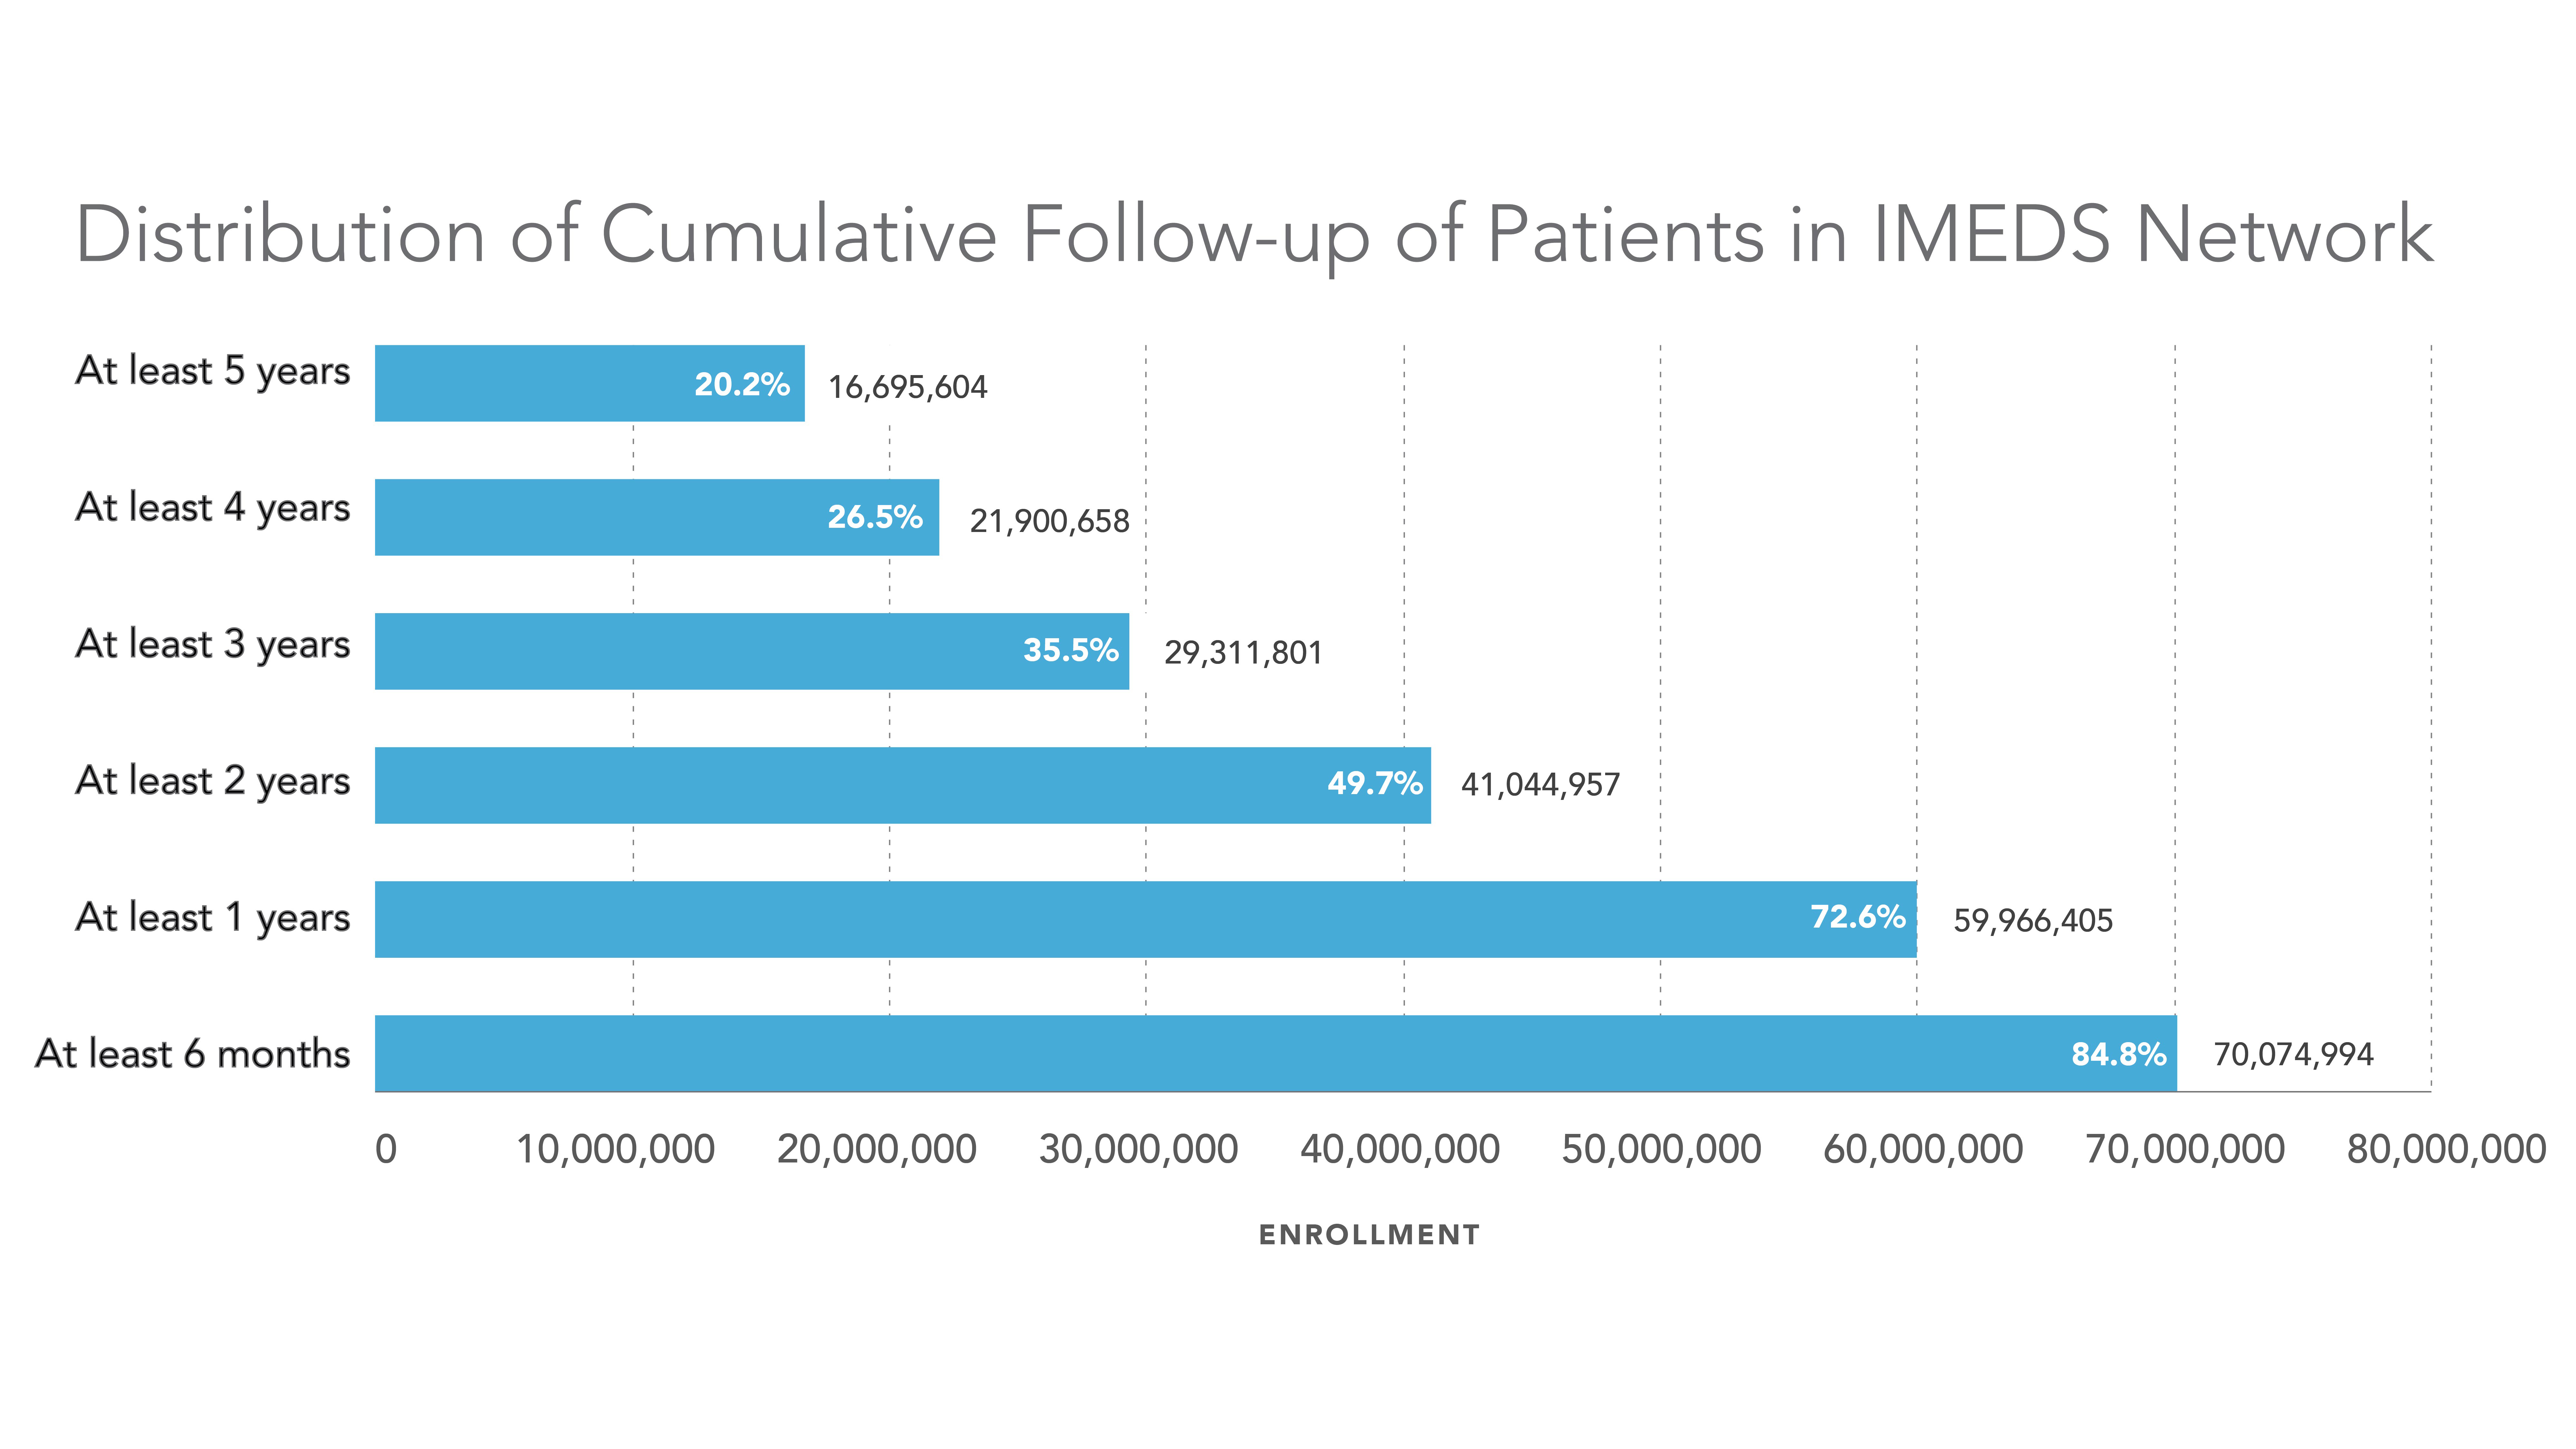 Distribution of Cumulative Follow-up of Patients in IMEDS Network